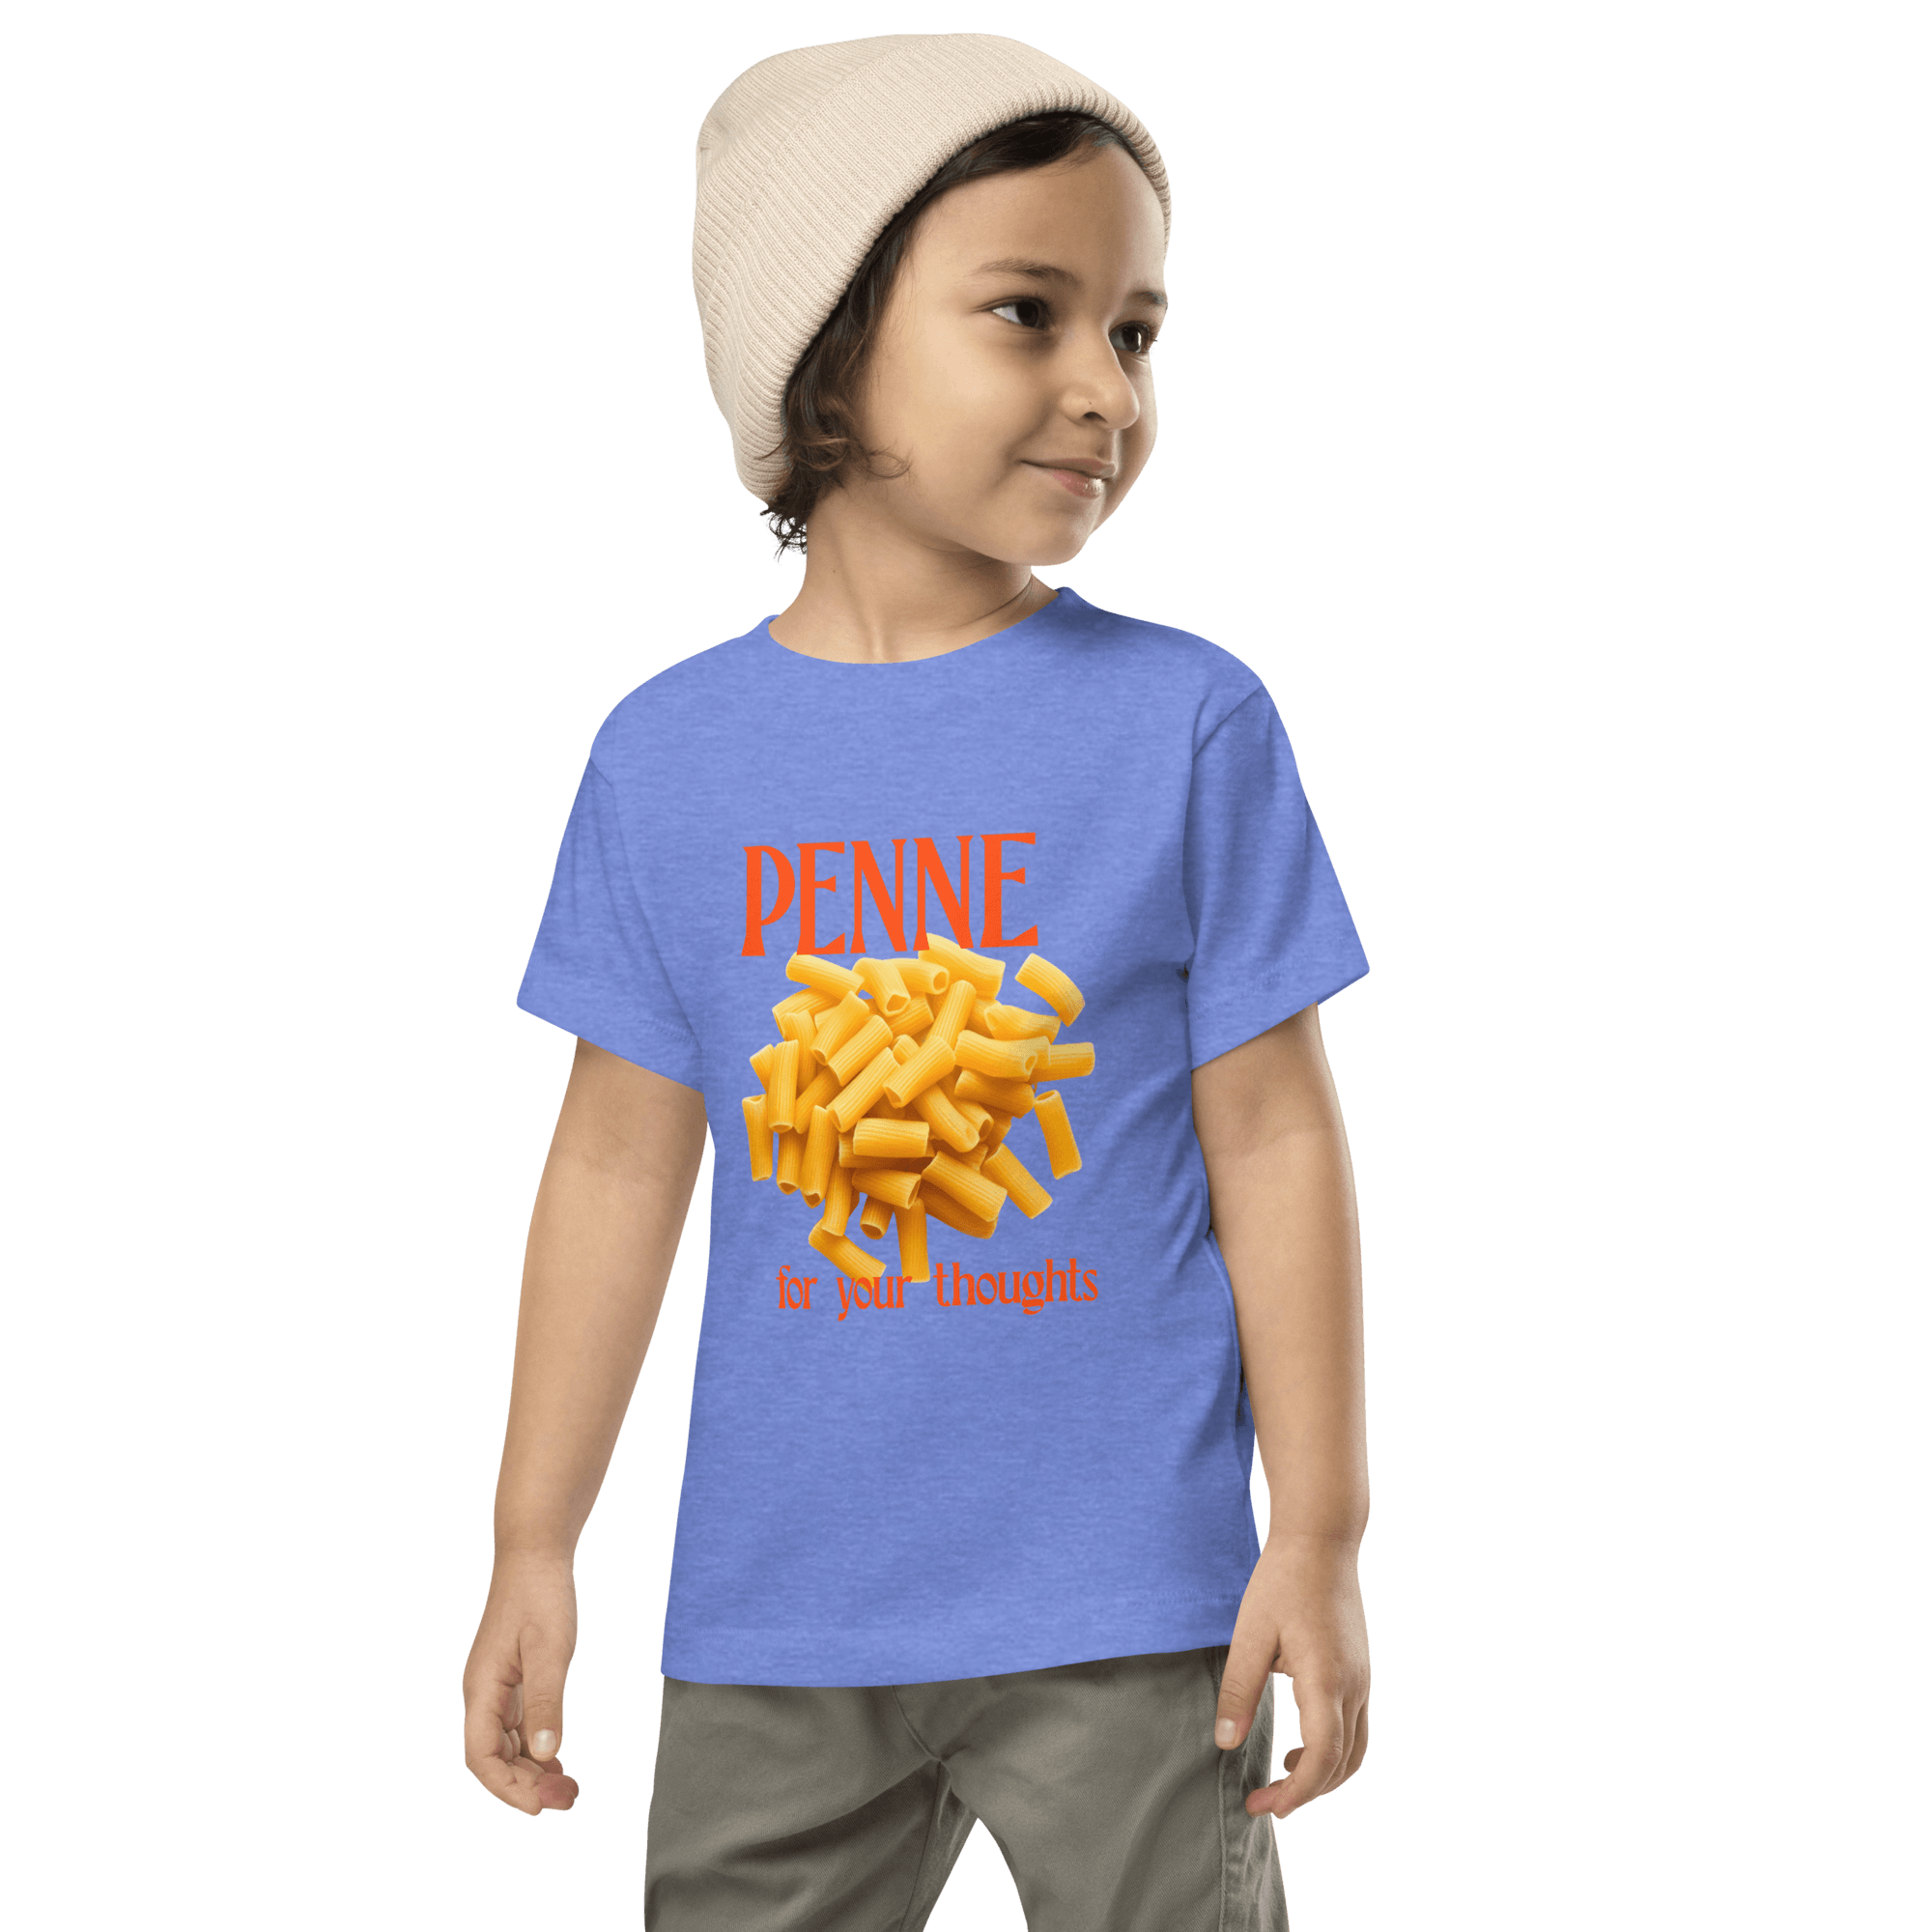 Penne For Your Thoughts Toddler T-Shirt - Polychrome Goods 🍊